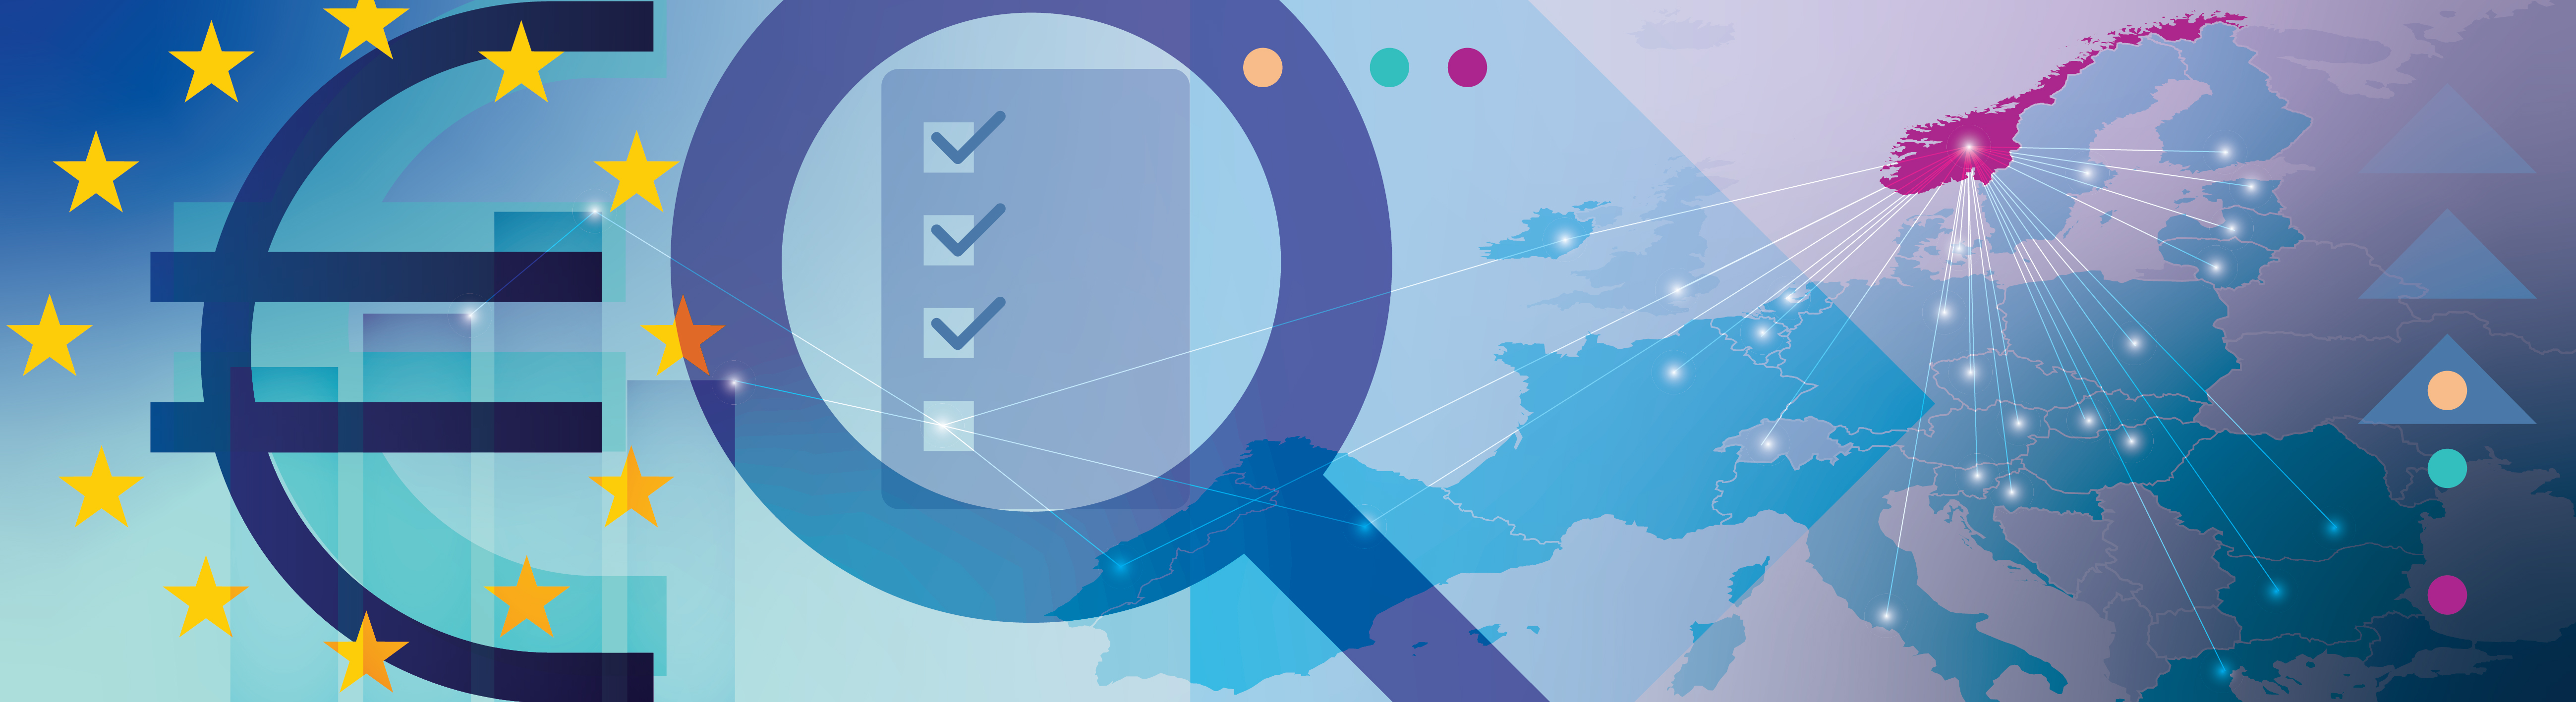 Graphic illustration for the EU Research Support Offive